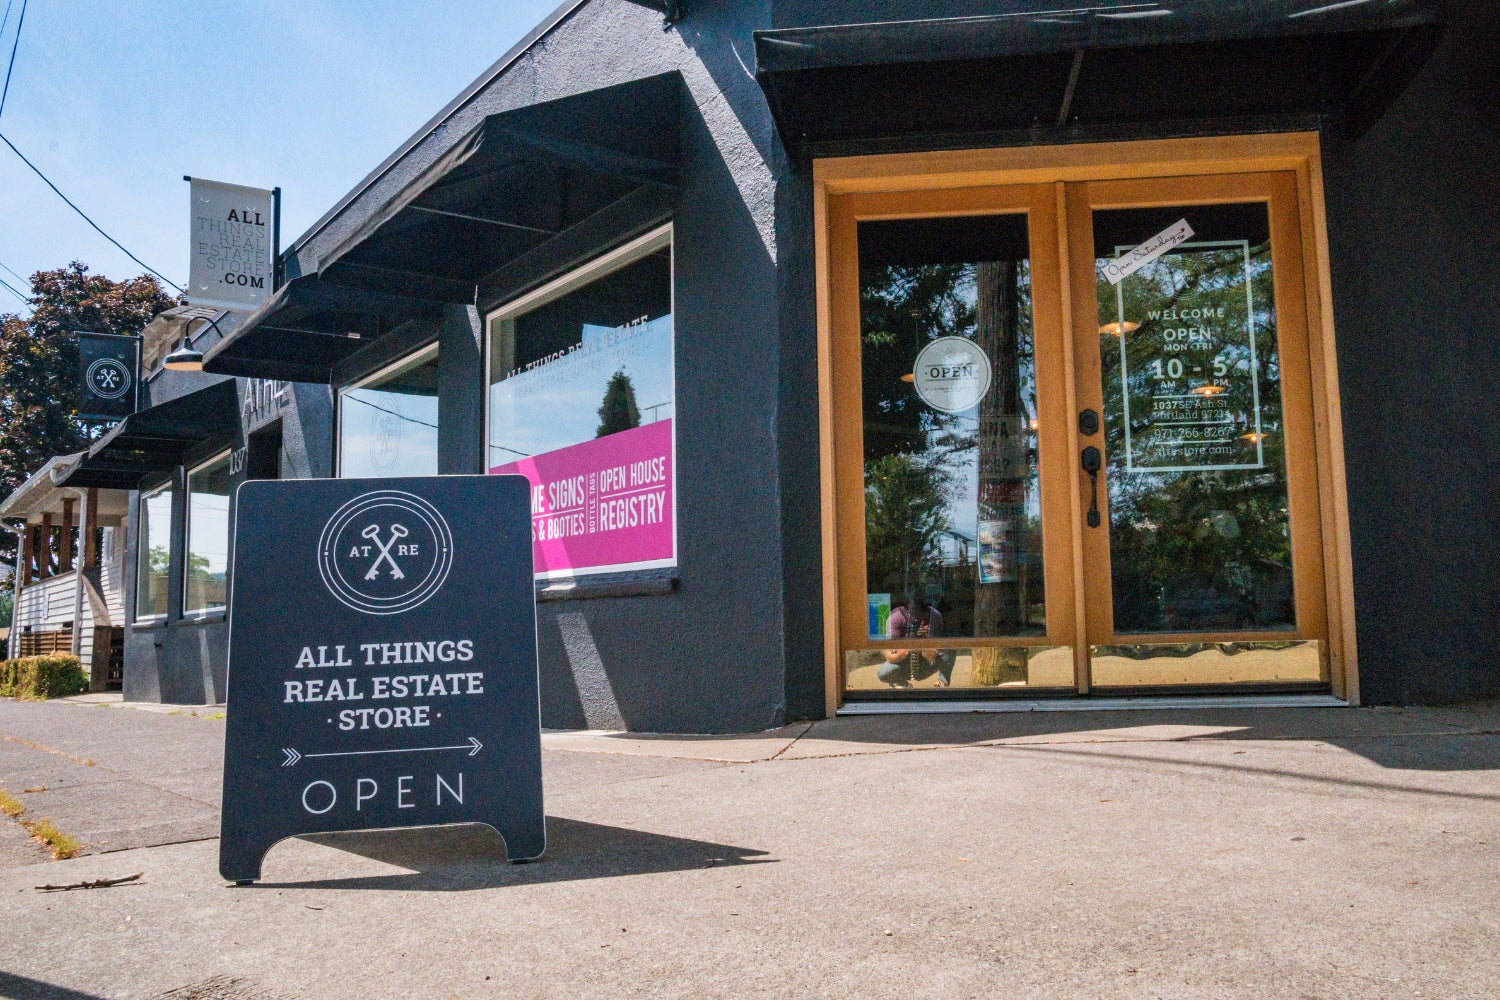 All Things Real Estate's new storefront